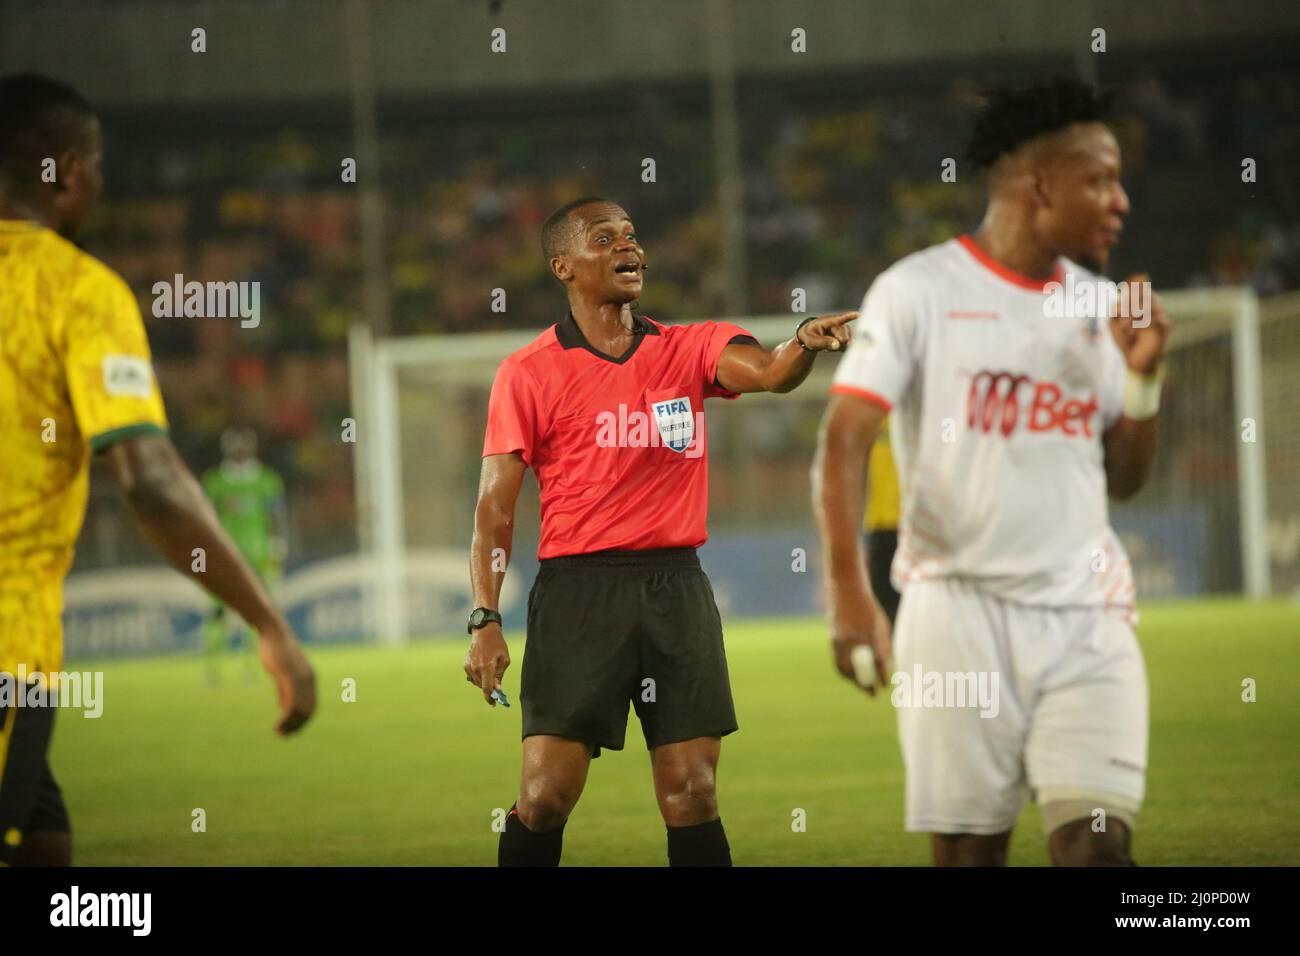 Central referee, Herry Sasii warning a player in a Premier League match in Tanzania Mainland, at Benjamin Mkapa Stadium in Dar es Salaam. PHOTO BY MIC Stock Photo